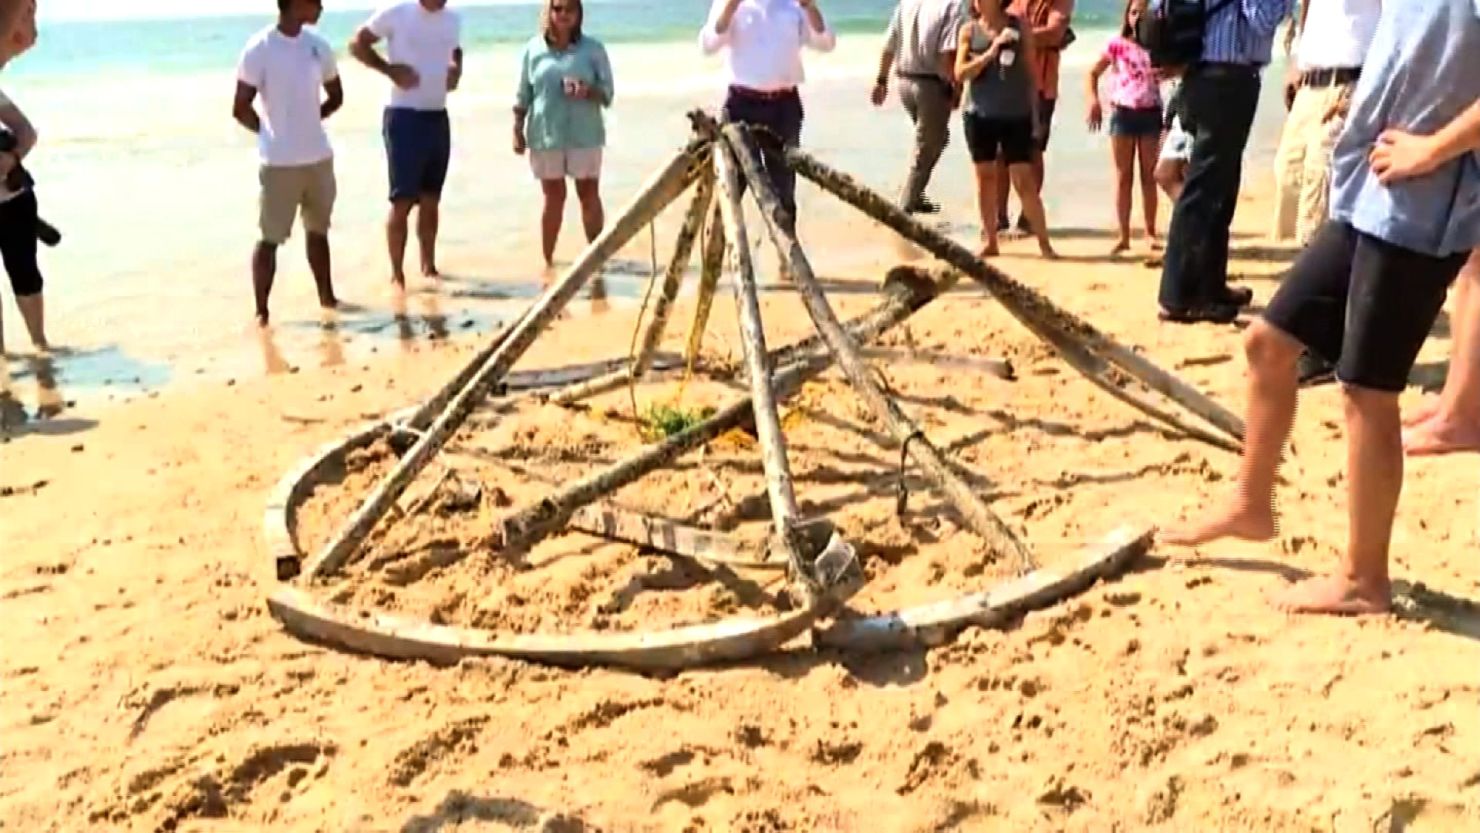 Mysterious object was uncovered on Rhode Island beach and taken away for examination 